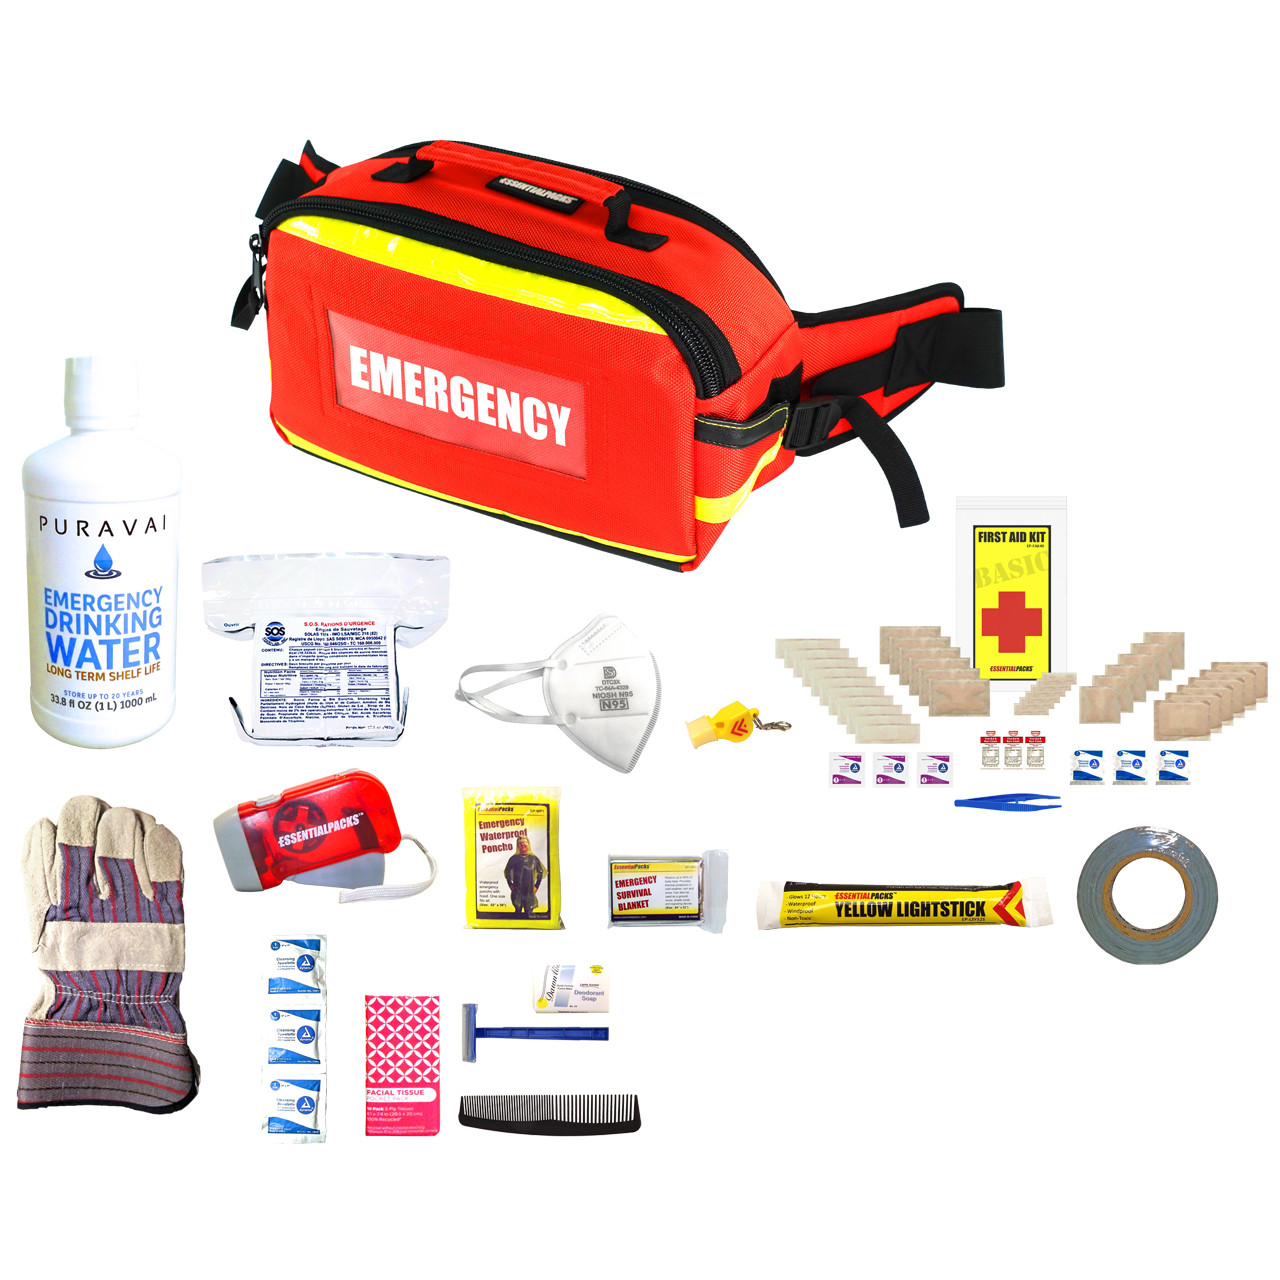 Complete Earthquake Bag - Emergency kit for earthquakes, hurricanes, floods  + other disasters (2 person, 3 days) : Amazon.in: Home Improvement